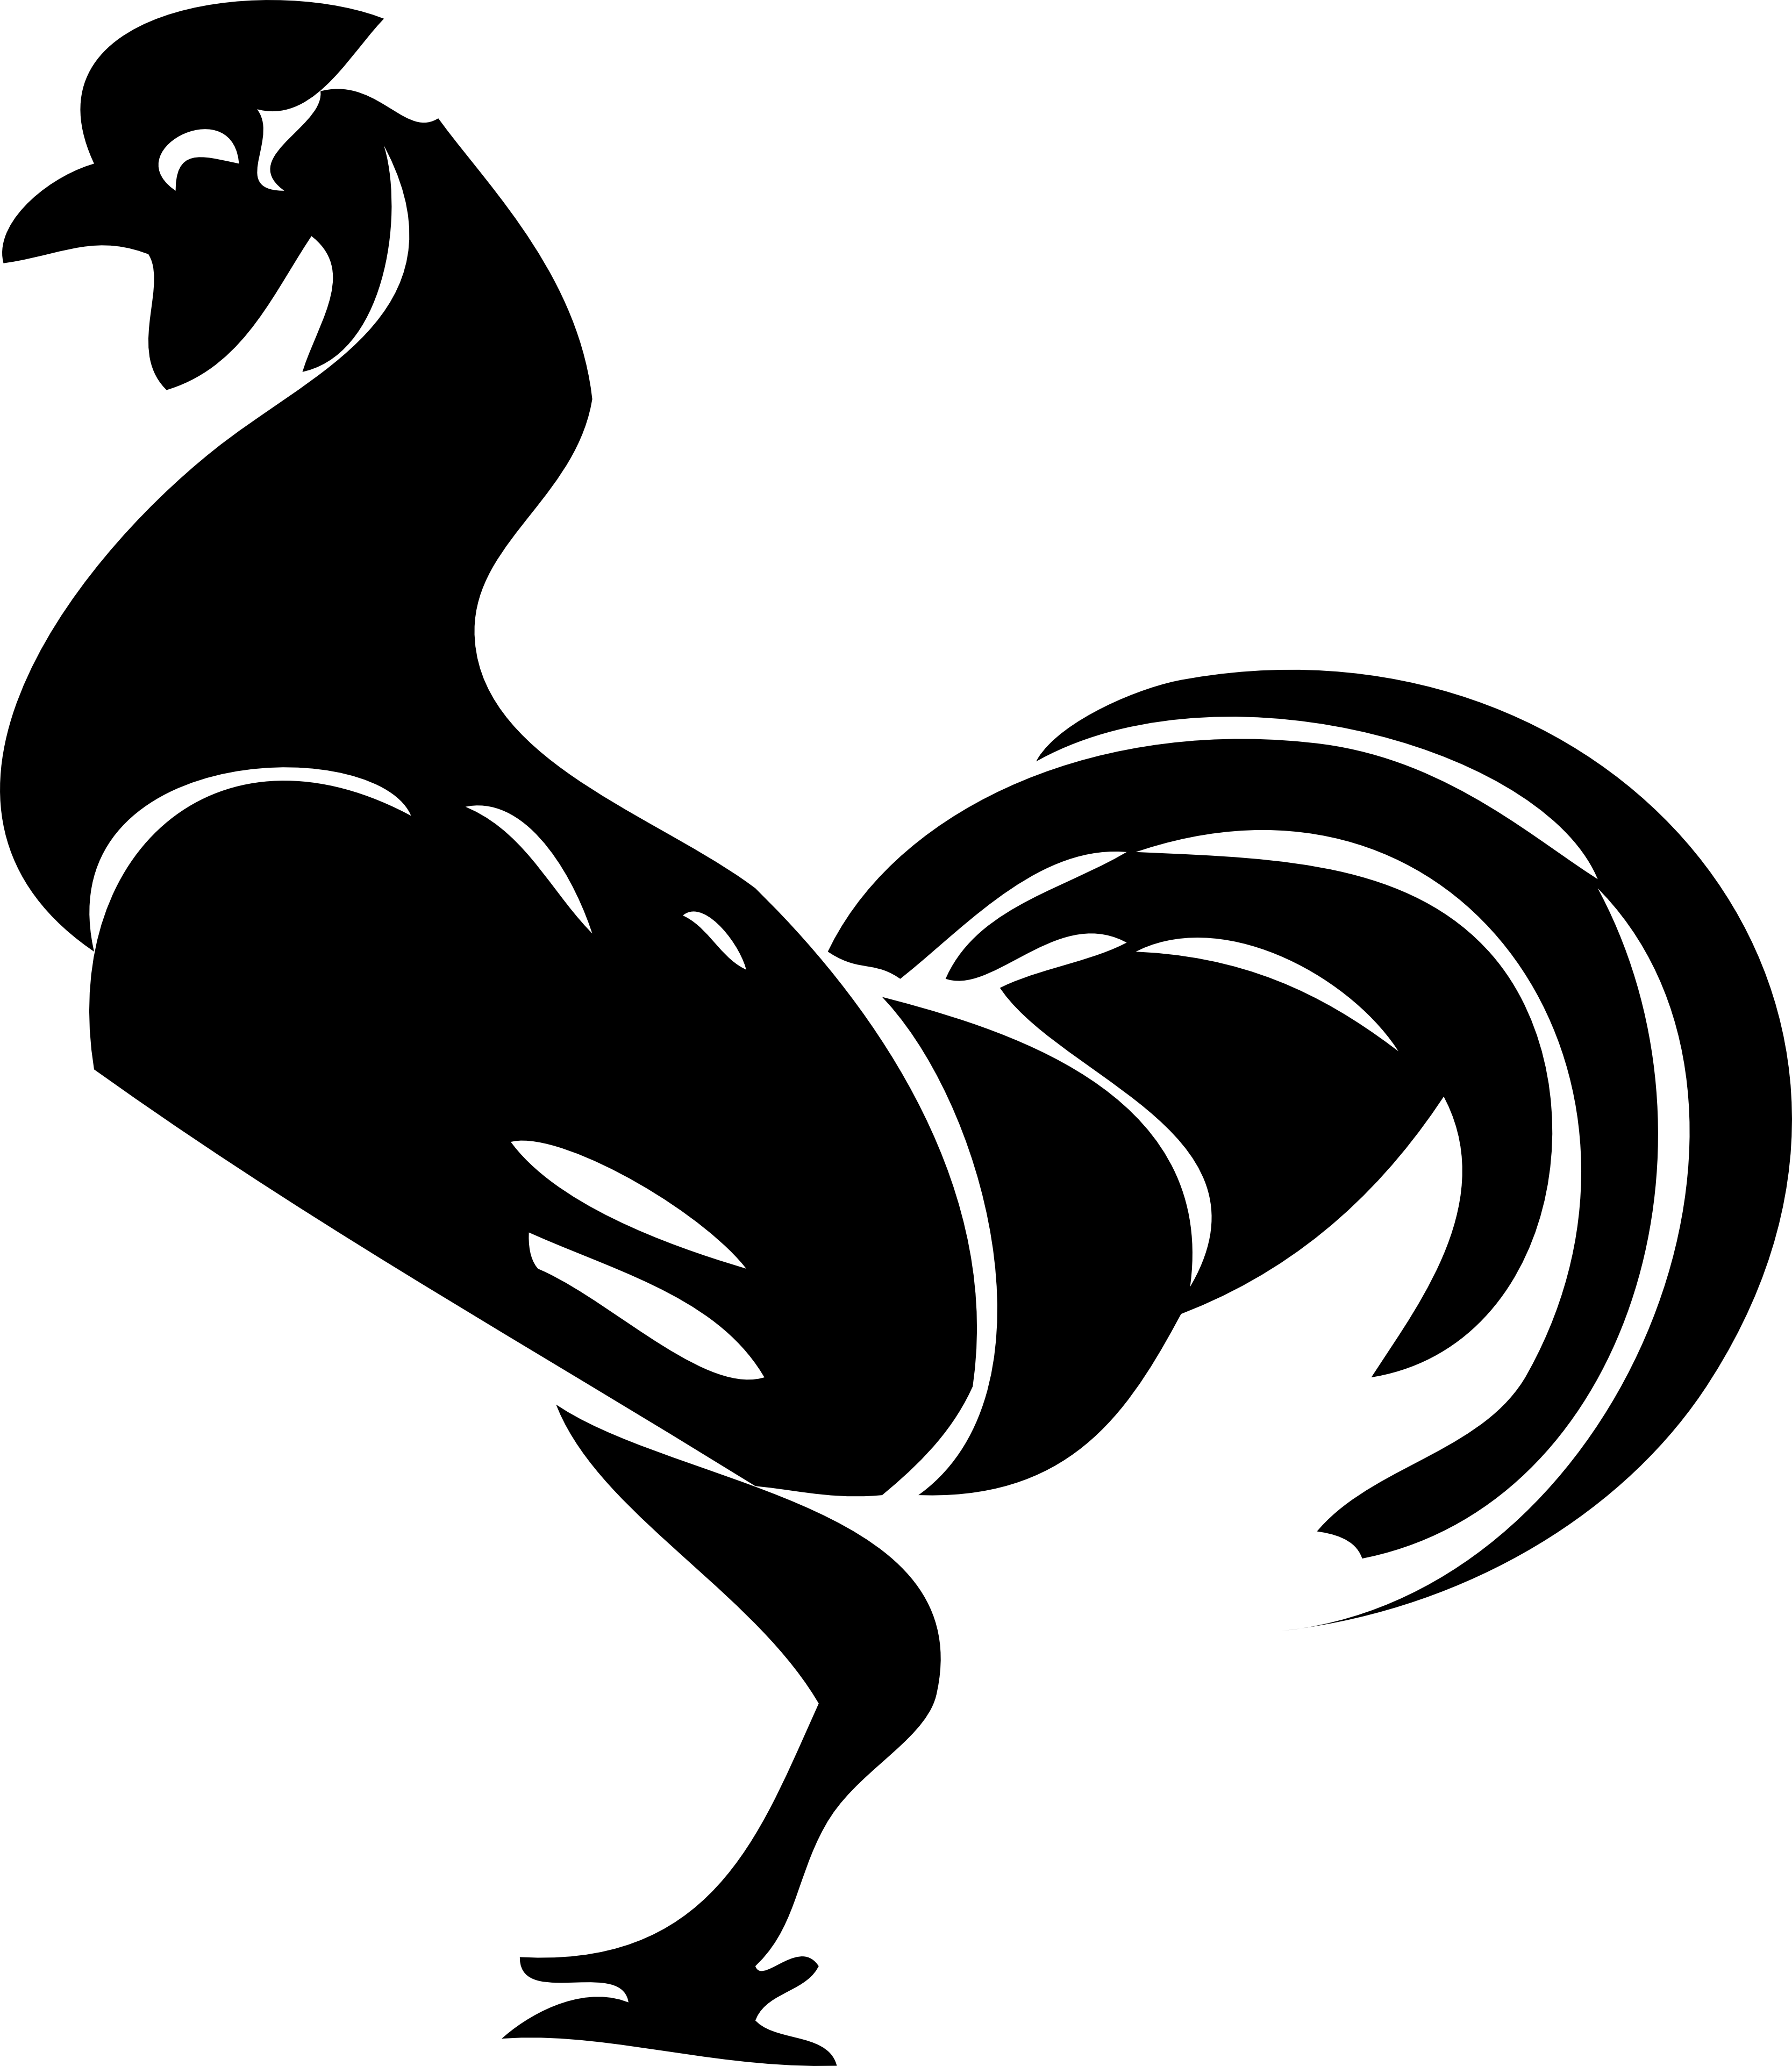 Black and White Rooster Logo - Black rooster clipart kid 4